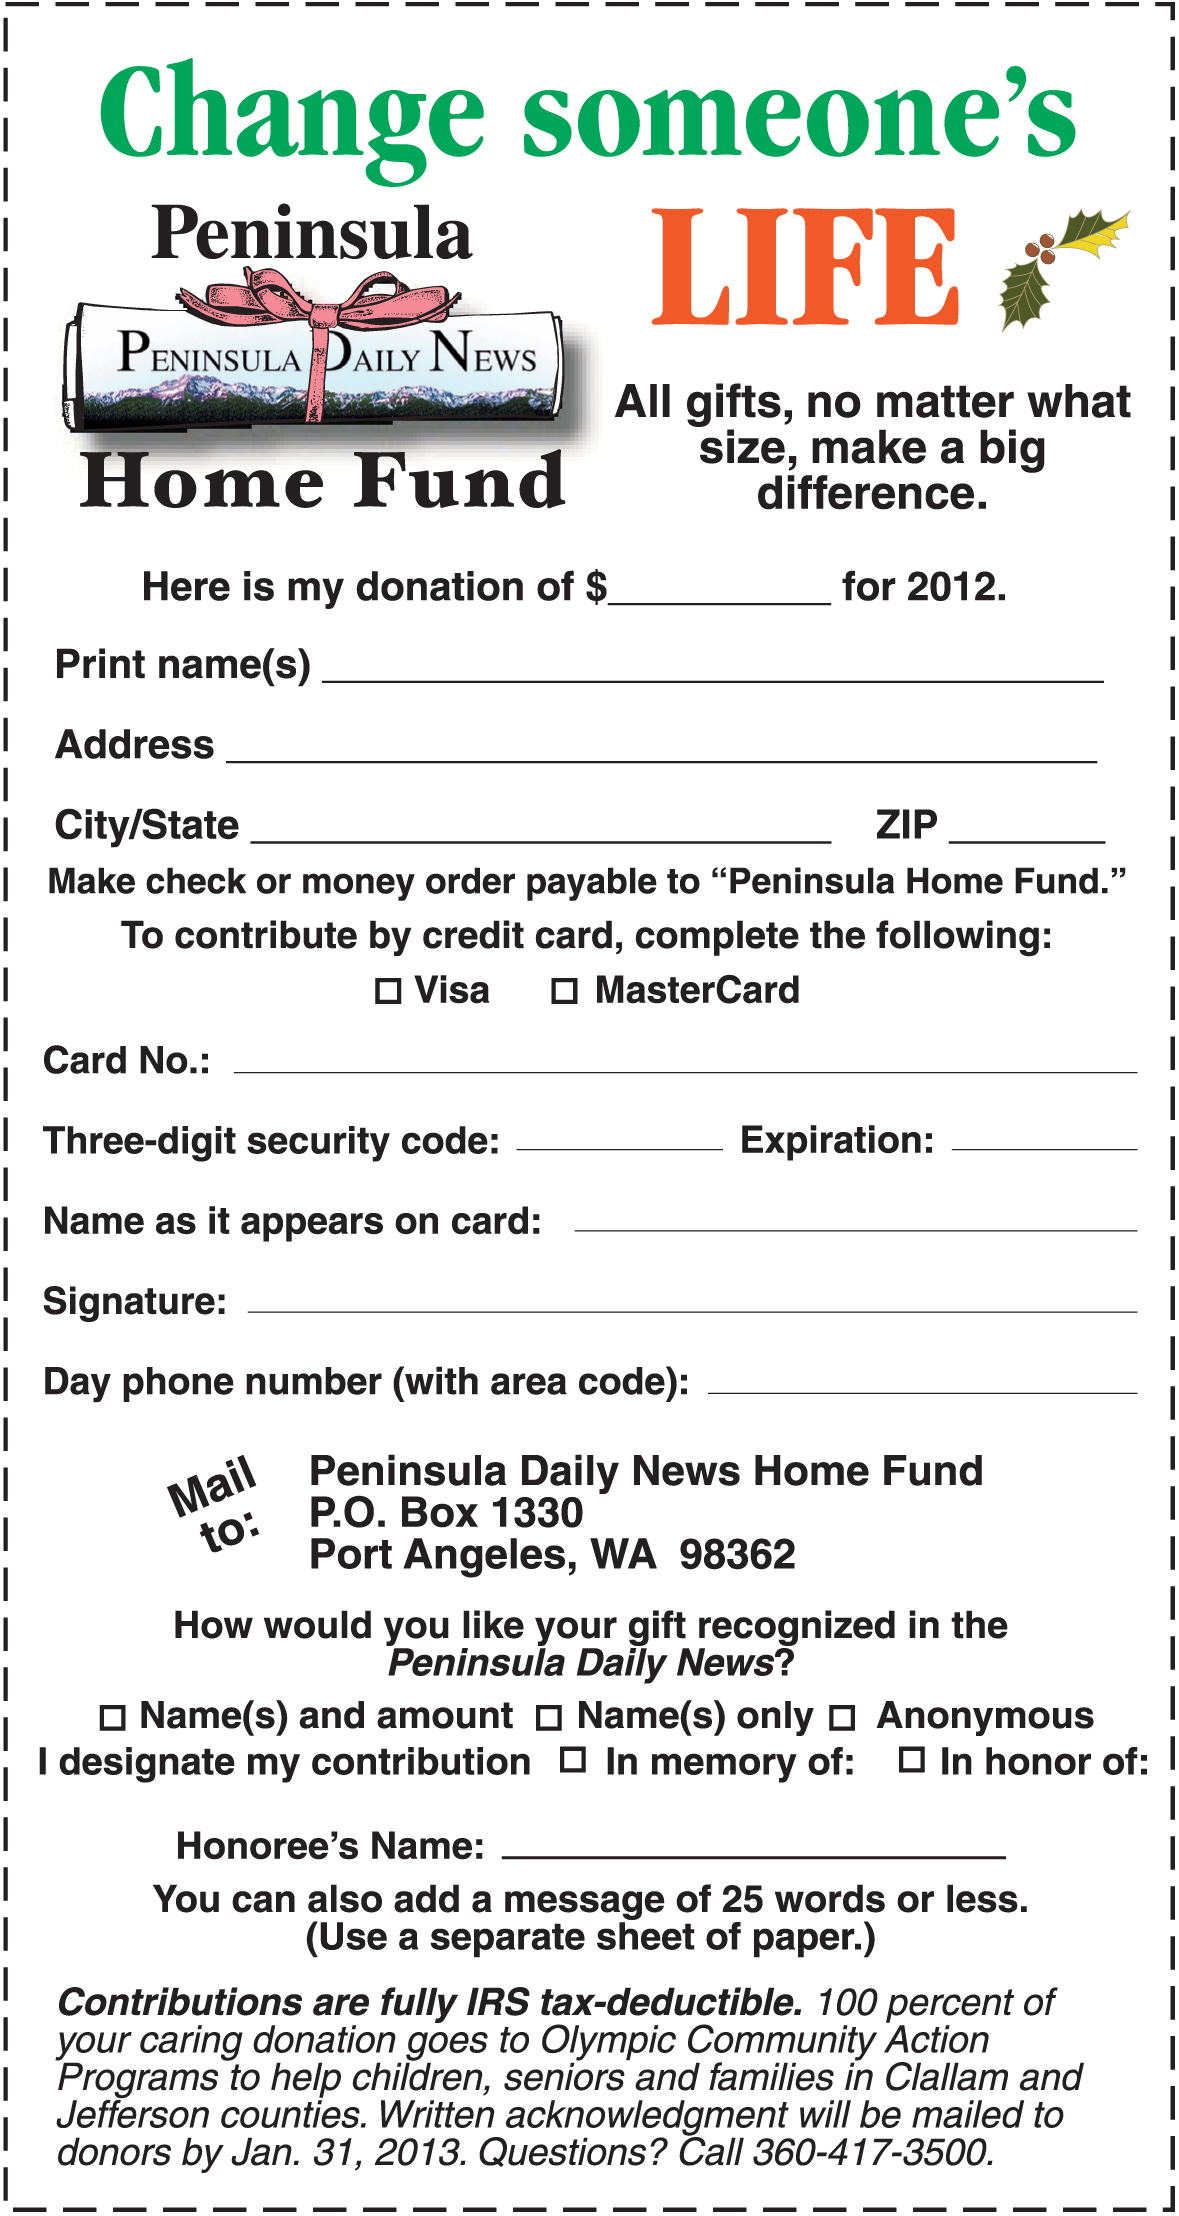 You can make a difference! Please donate to Peninsula Home Fund.